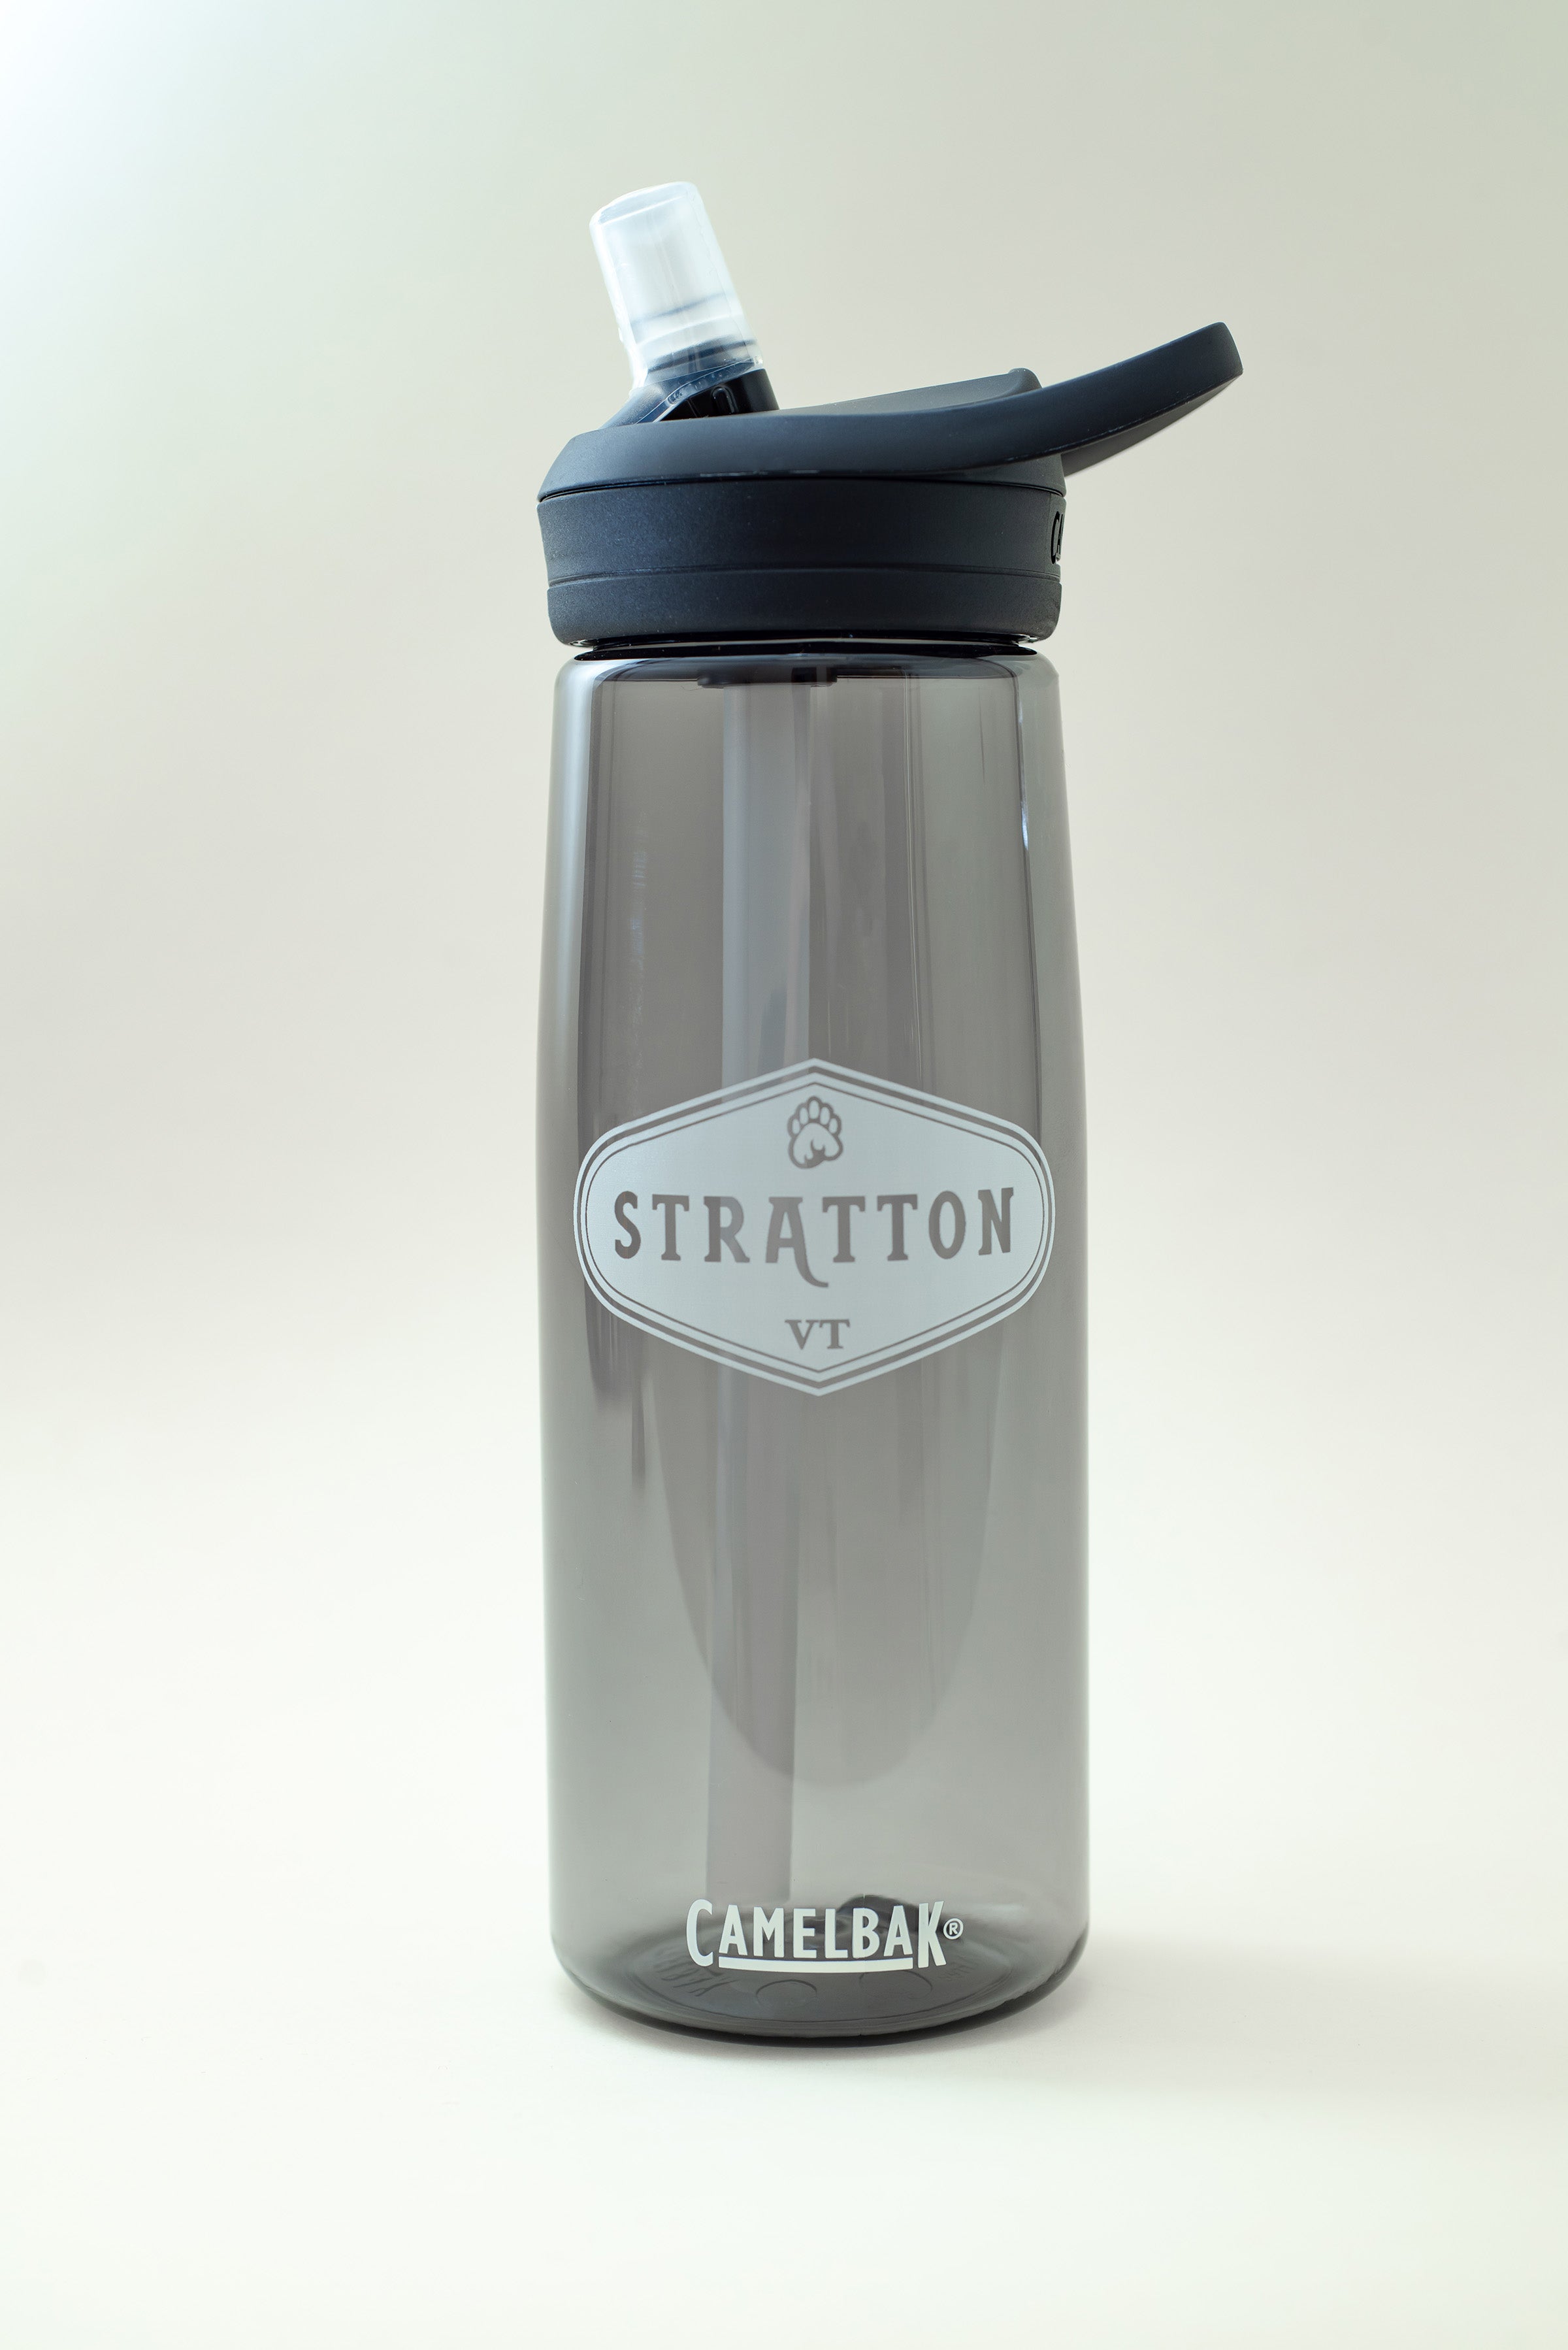 Stratton Camelbak Water Bottle – The On Line Shop